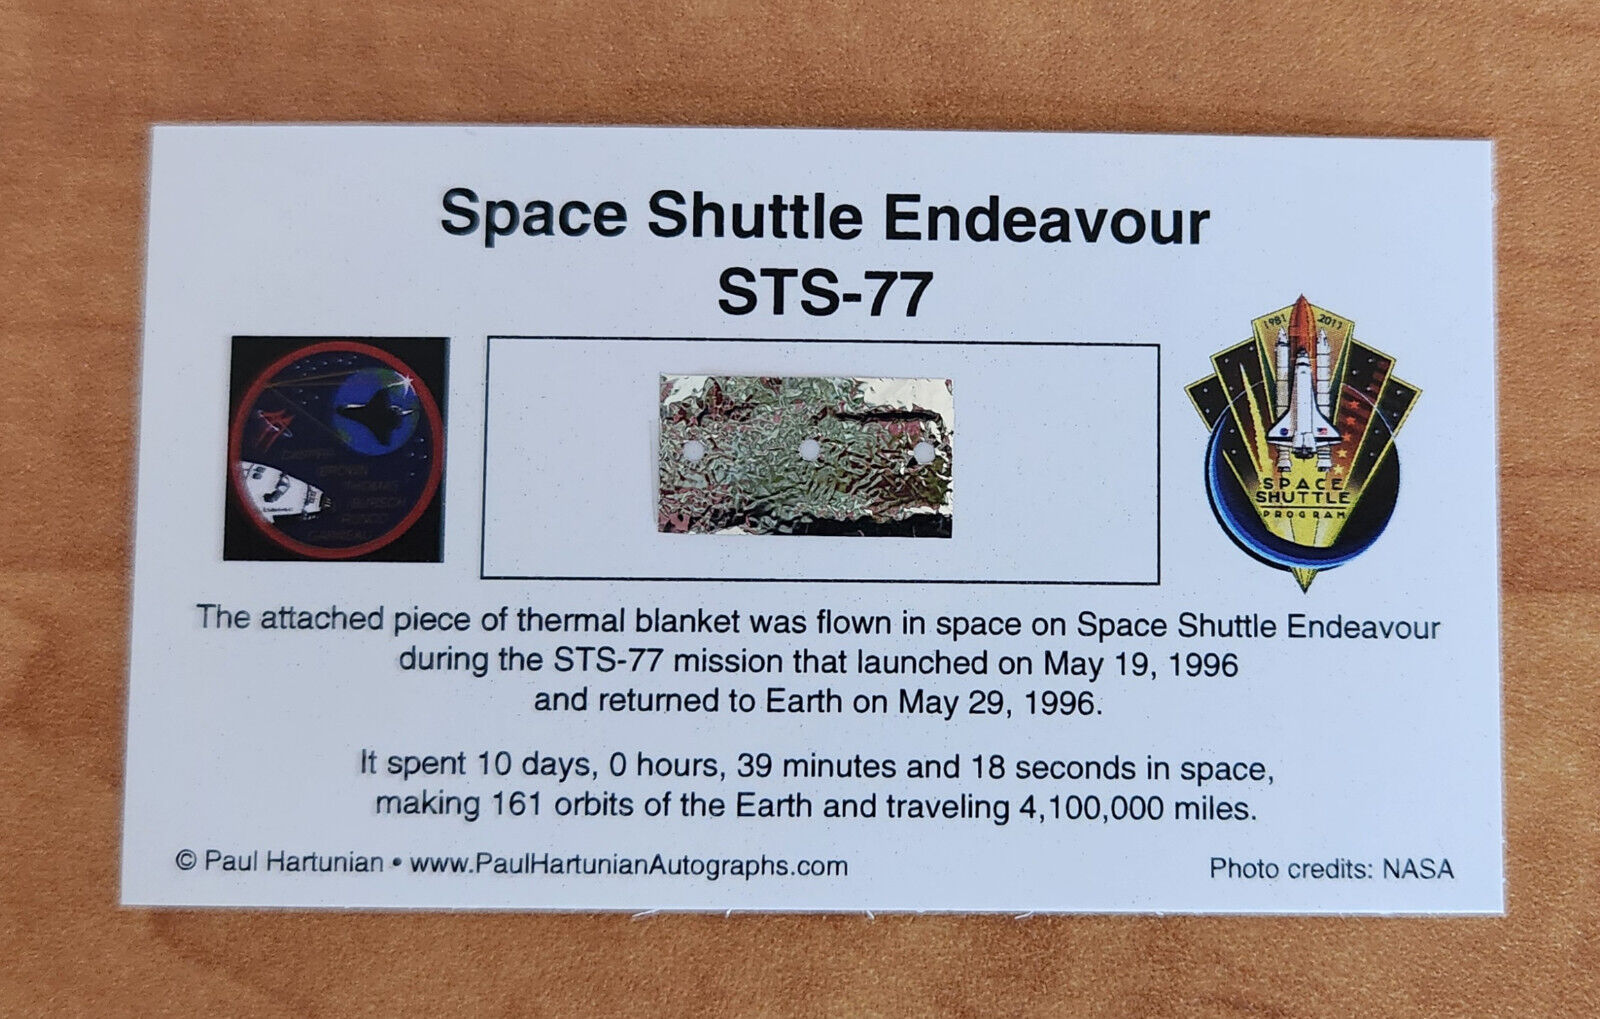 Own a Genuine Piece of Flown Space Shuttle Endeavour STS-77 Only $14.95